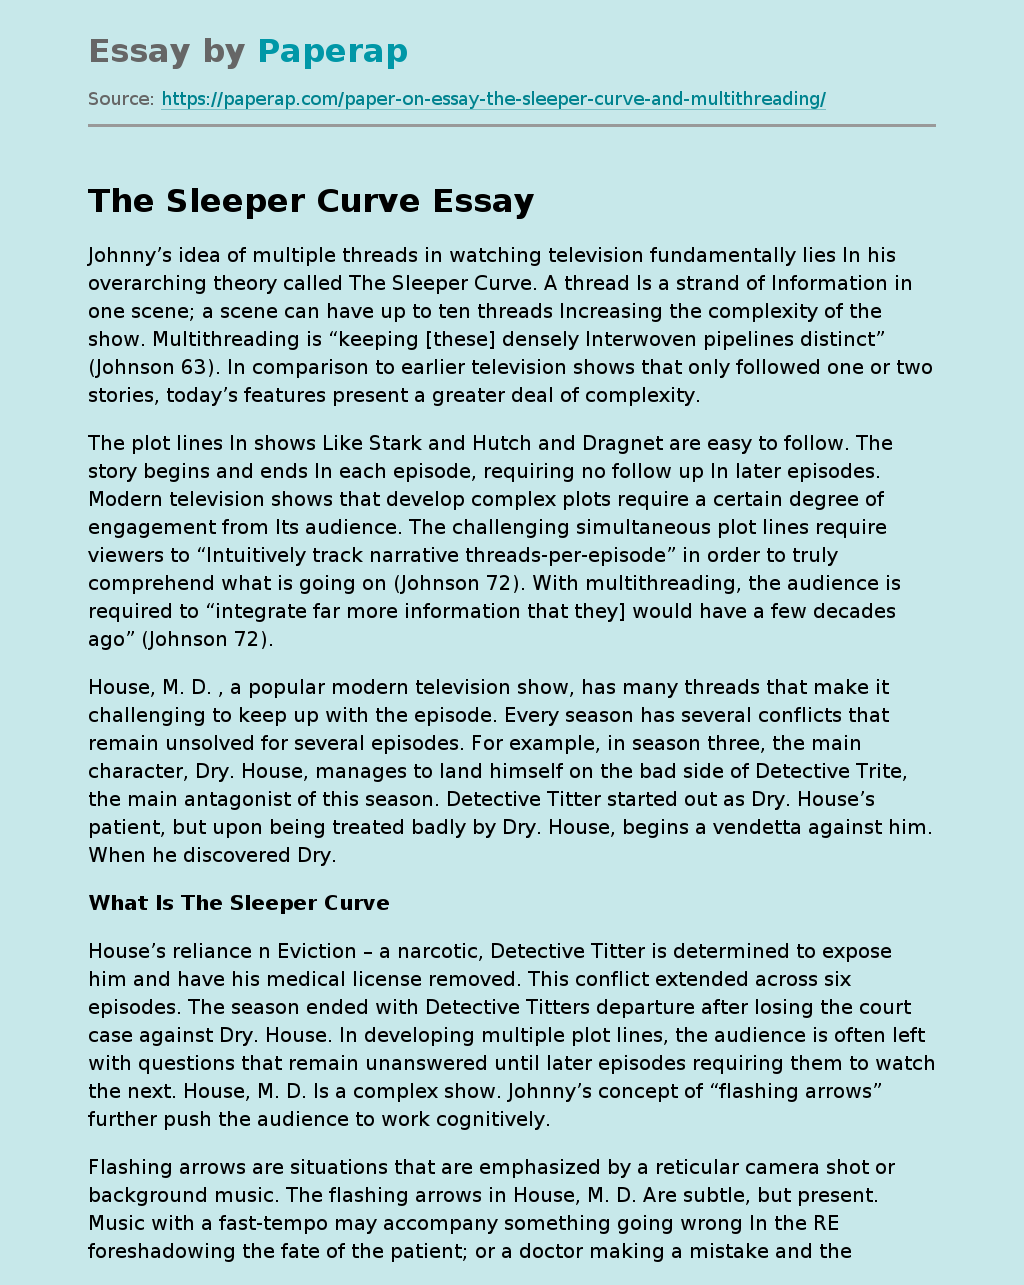 What Is The Sleeper Curve